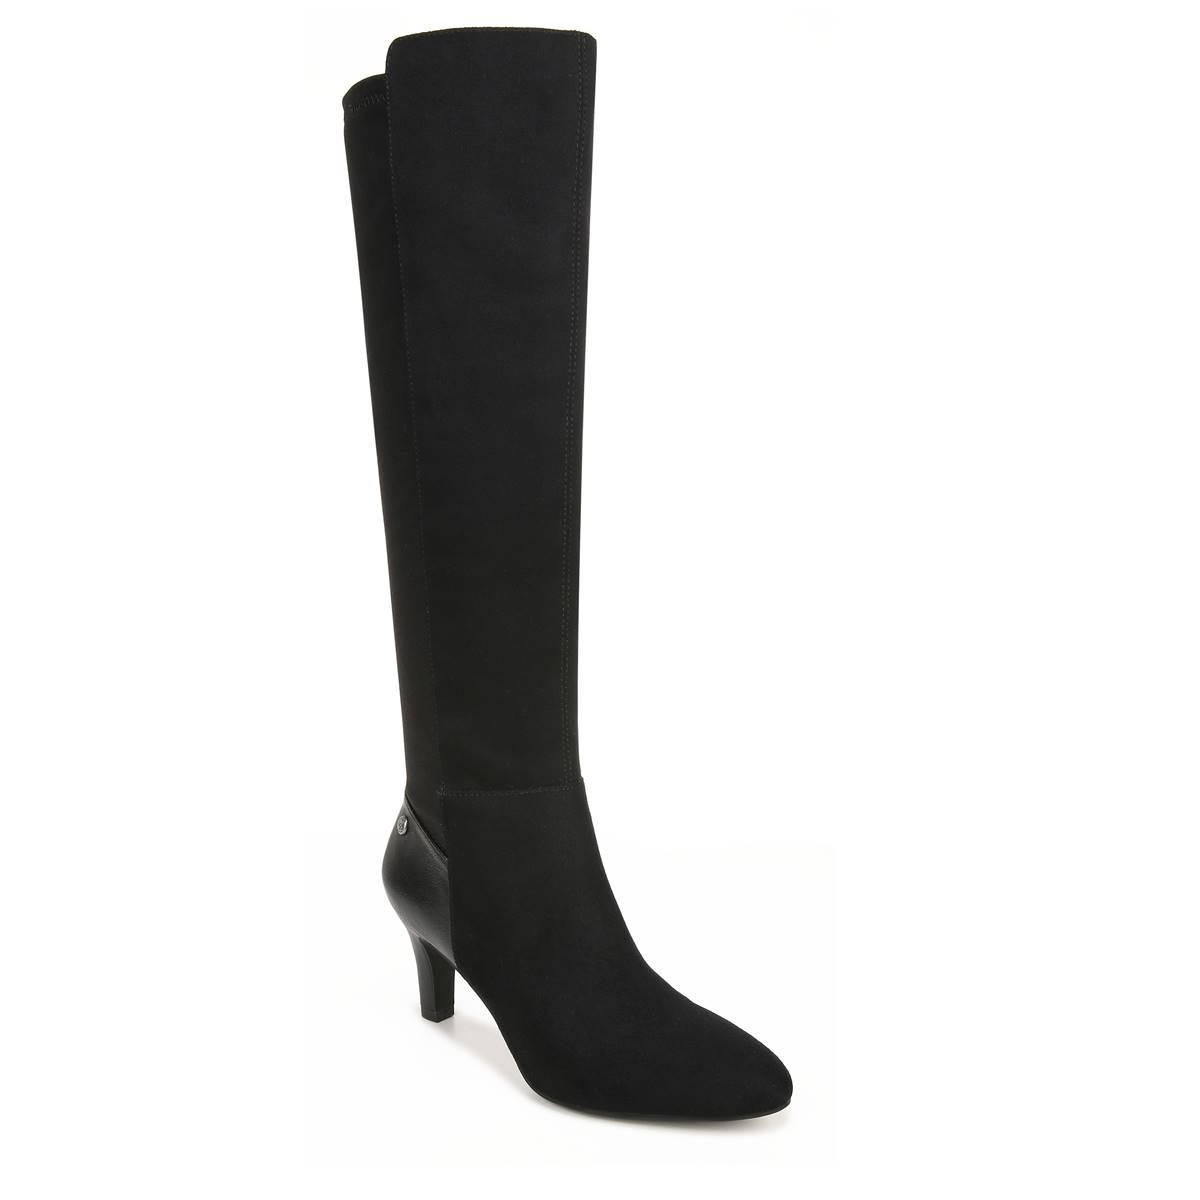 LifeStride Gracie Knee High Boot Product Image